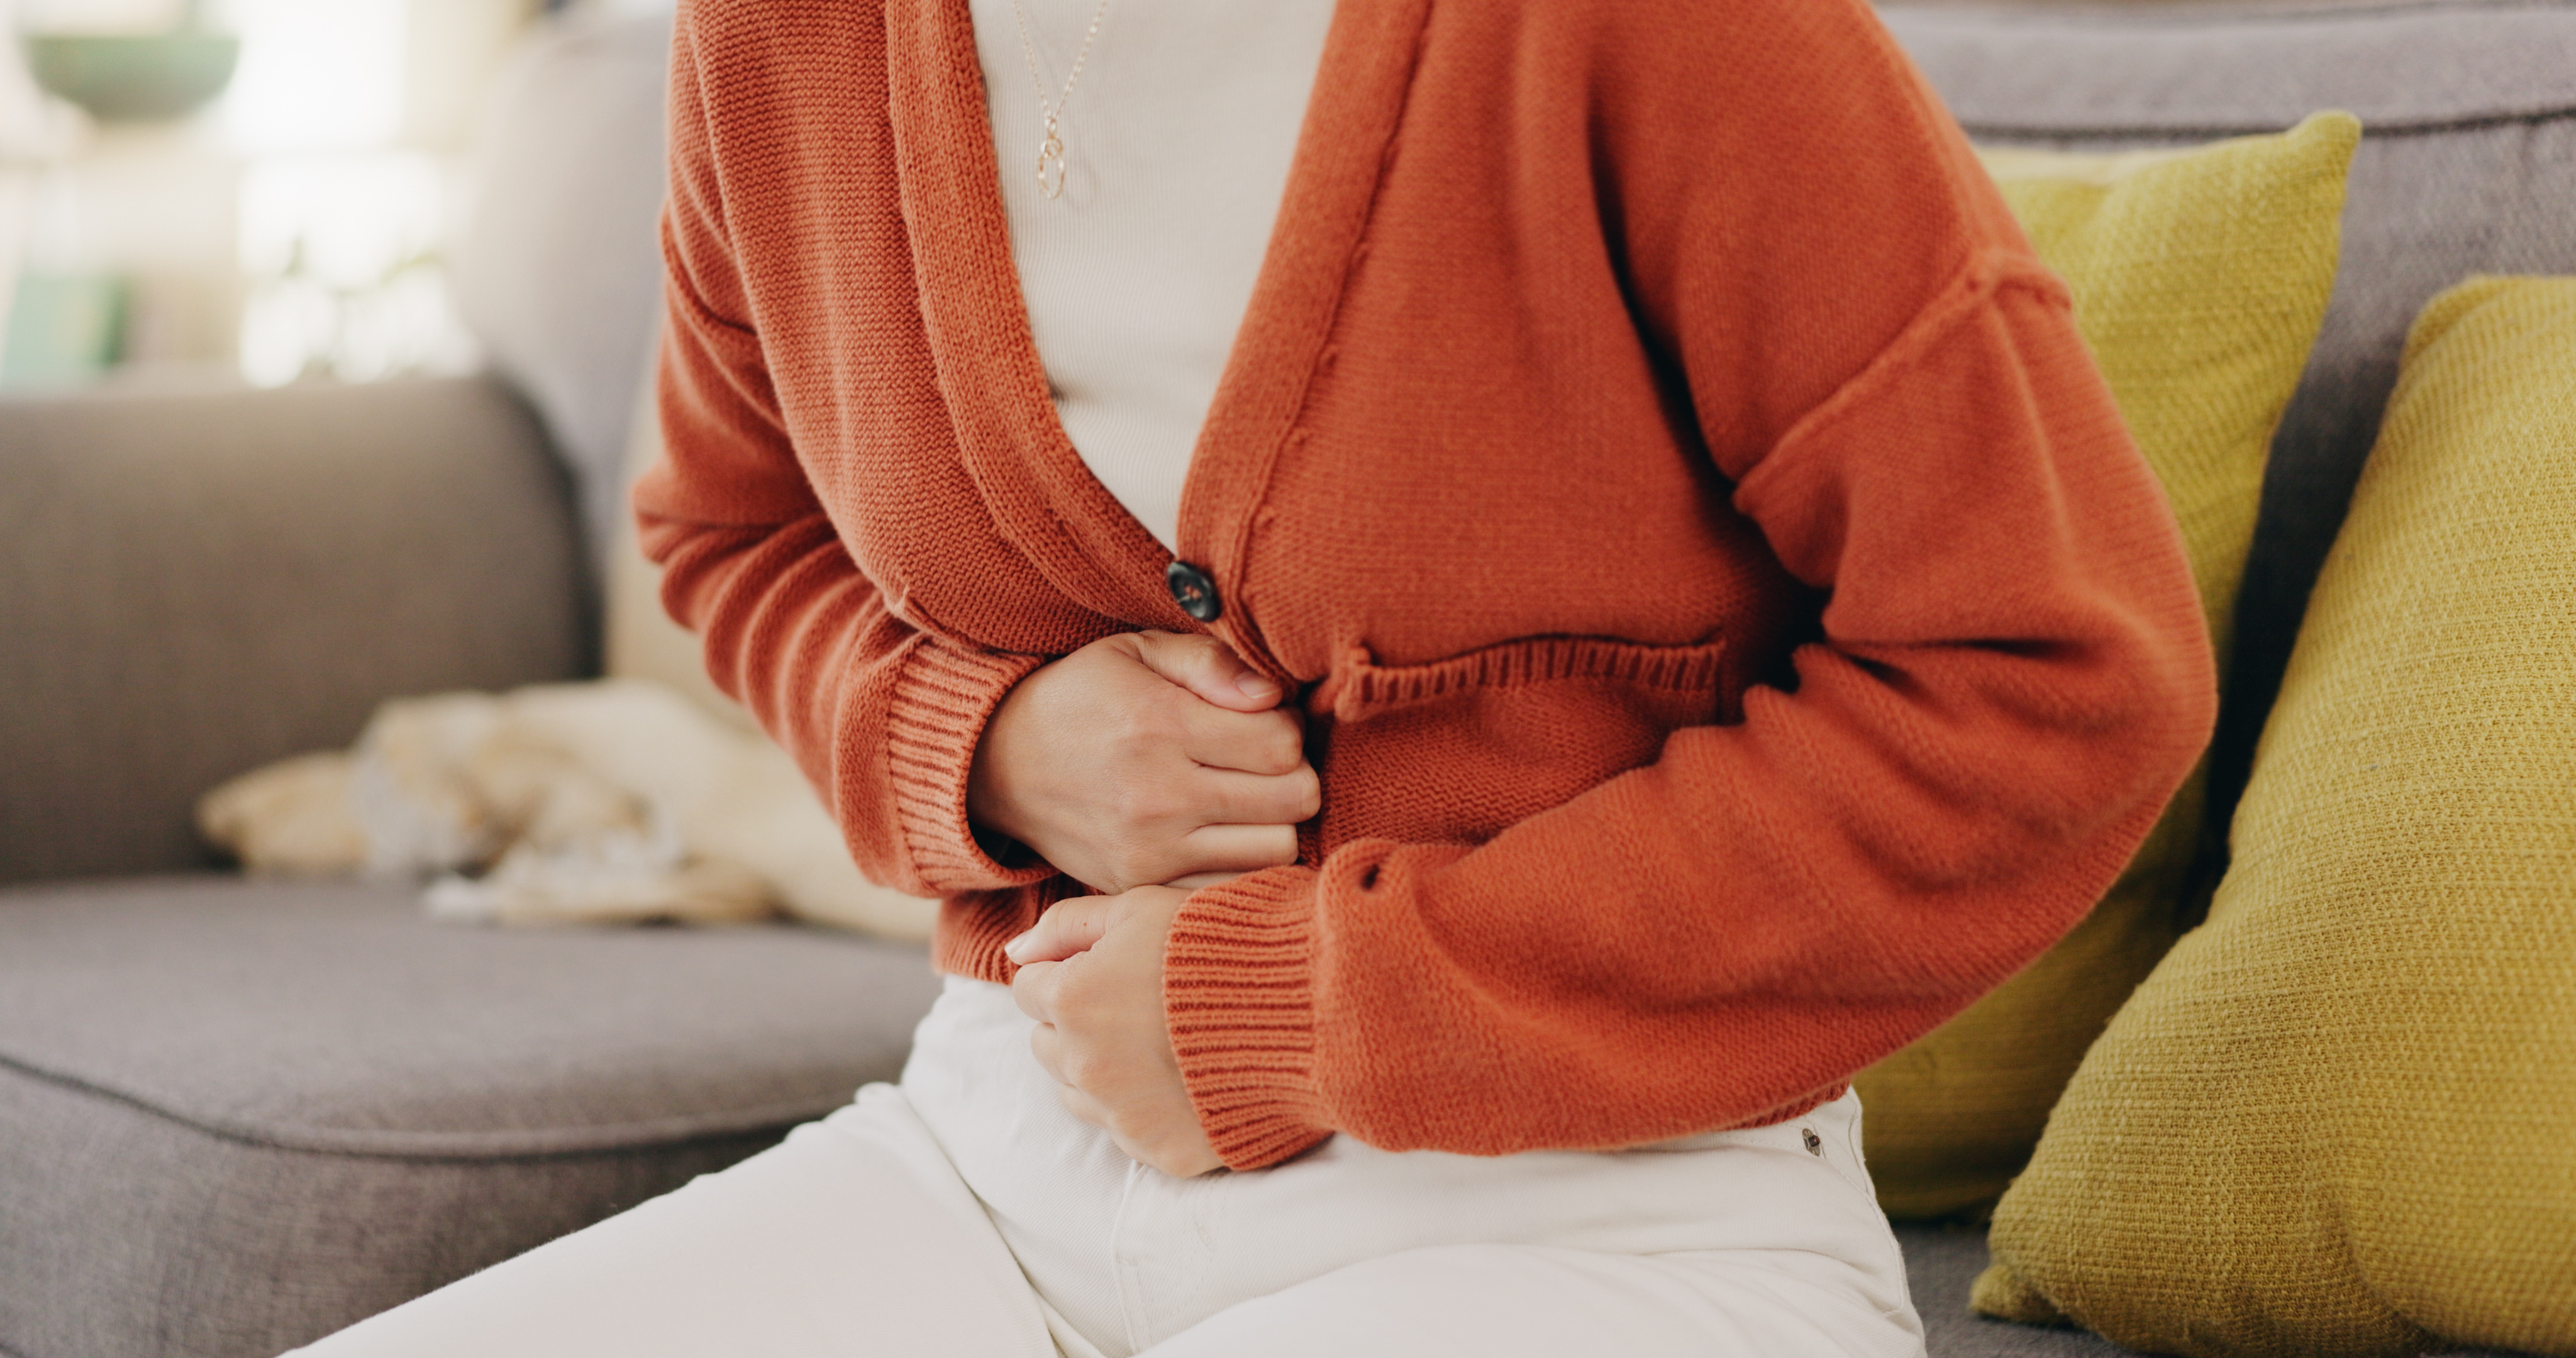 A woman experiencing stomach pain - learn how you can find relief with Vida-Flo's IV hydration treatment for gastrointestinal diseases in Nashville, TN.